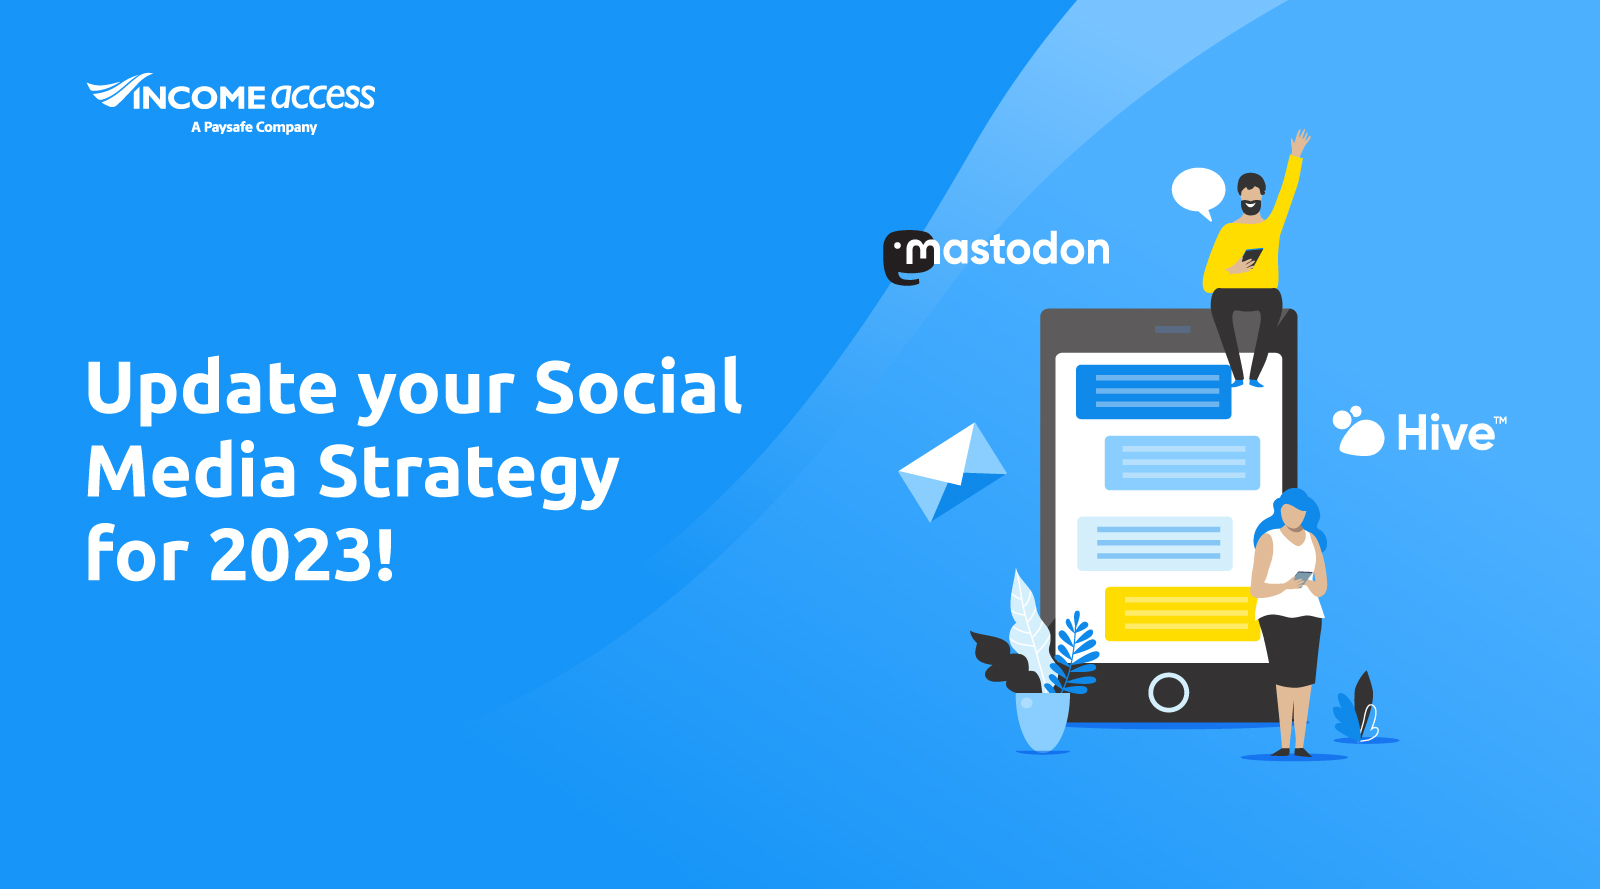 Blue background with white text on left saying "Update your Social Media Strategy for 2023!" and image on right side of mobile device with a chat box on screen